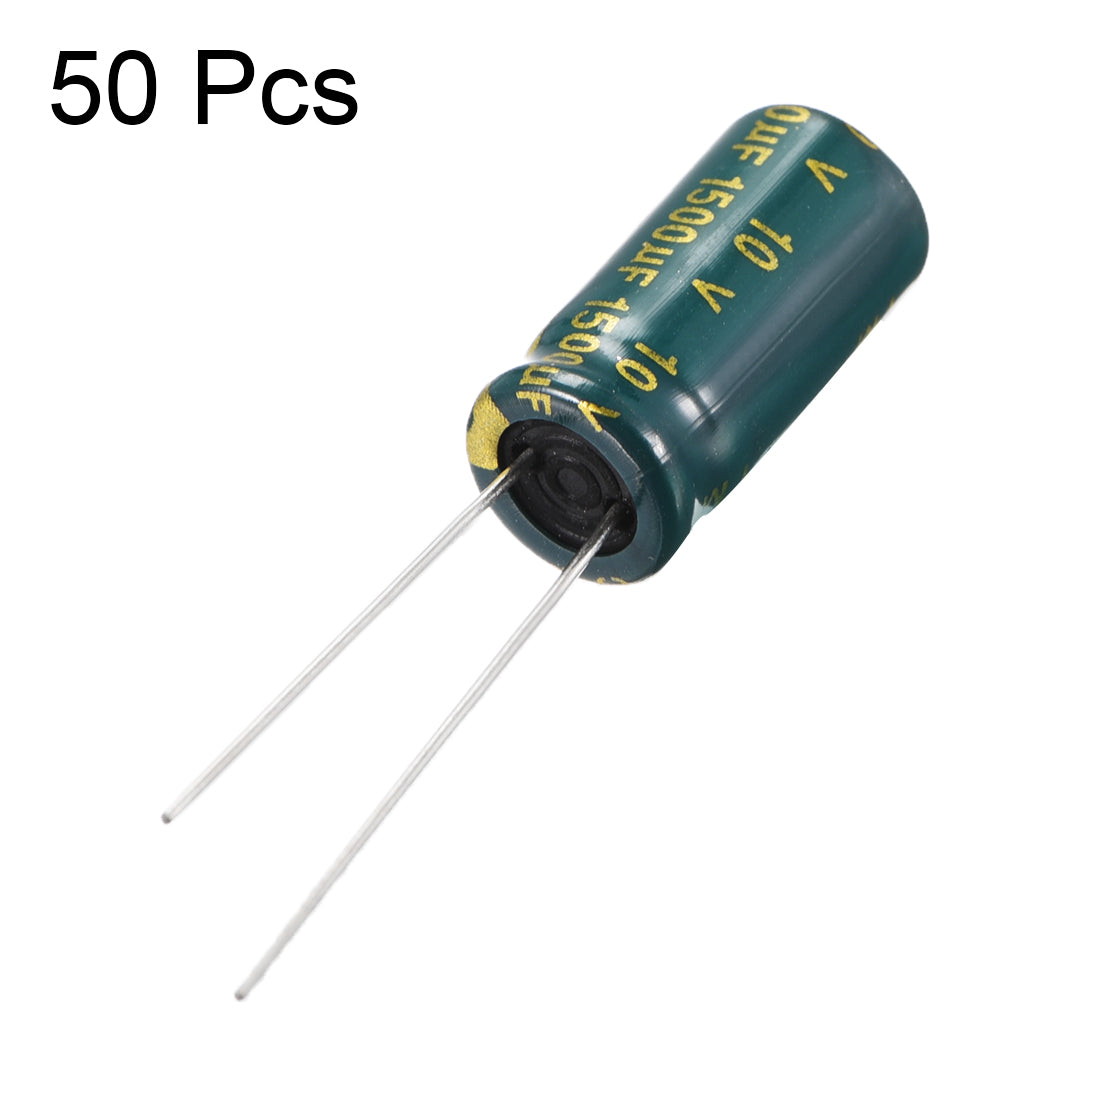 uxcell Uxcell Aluminum Radial Electrolytic Capacitor Low ESR Green with 1500uF 10V 105 Celsius Life 3000H 8 x 16 mm High Ripple Current,Low Impedance 50pcs